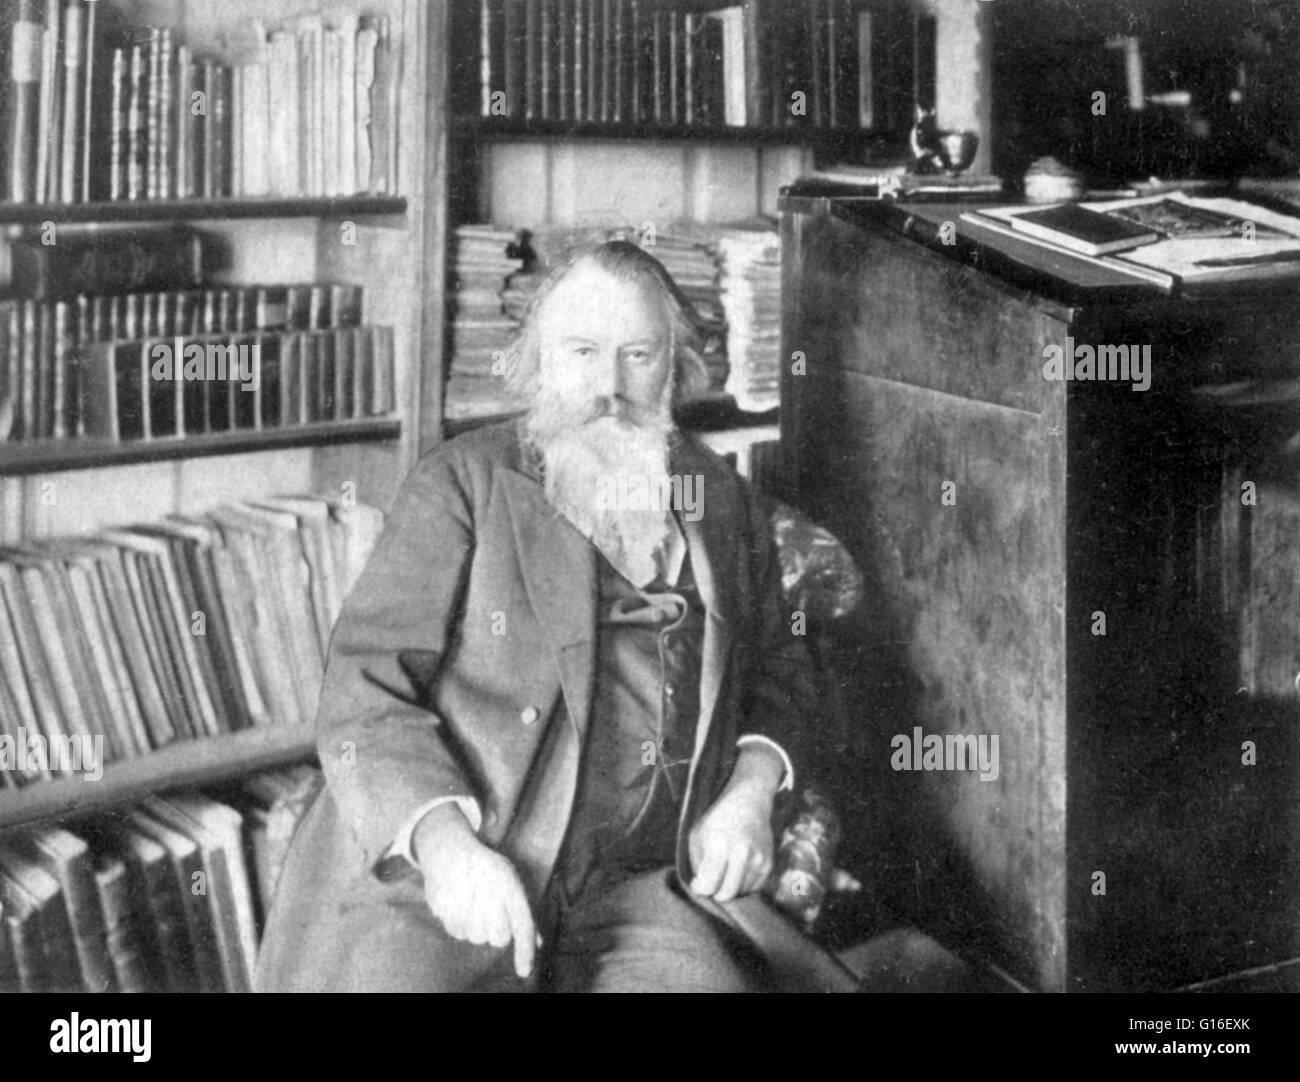 Brahms in his library, 1895. Johannes Brahms (May 17, 1833 - April 3, 1897) was a German composer and pianist, and one of the leading musicians of the Romantic period. Brahms spent much of his professional life in Vienna, Austria, where he was a leader of Stock Photo